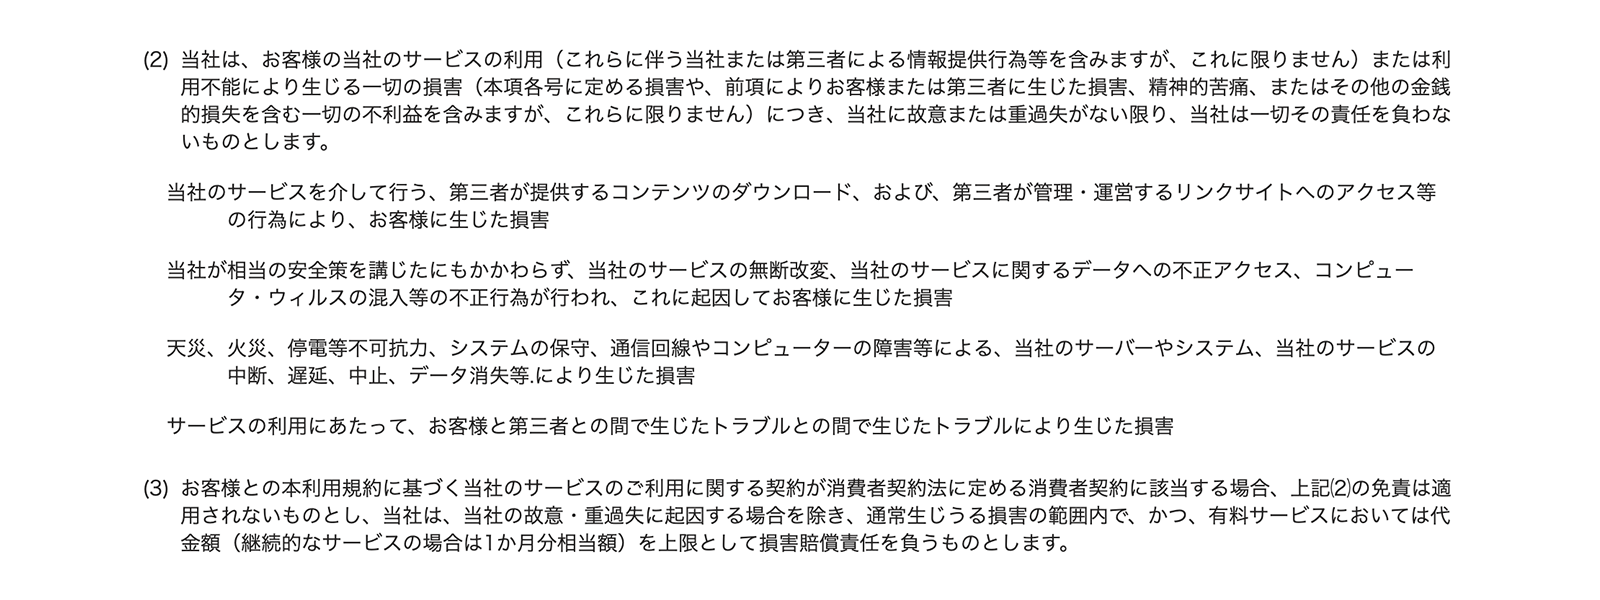 https://about.paypay.ne.jp/docs/terms/paypay-consumer-terms/ 2019年8月25日最終アクセス